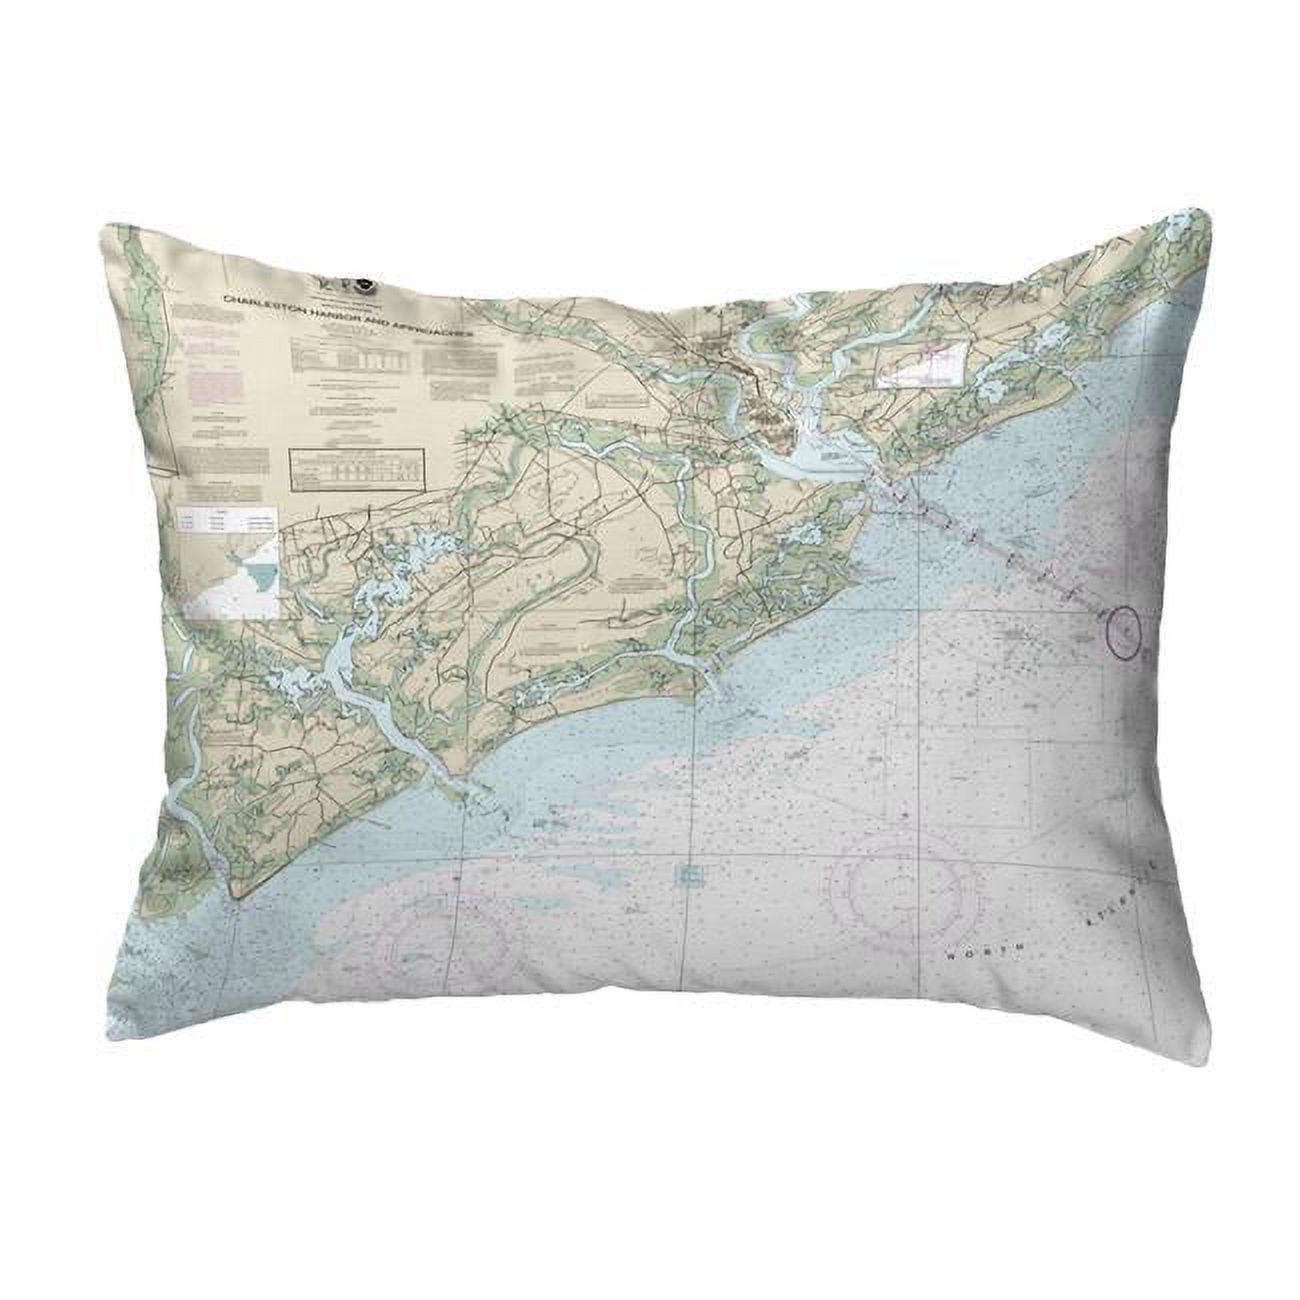 NC11521 16 x 20 in. Charleston Harbor & Approaches, SC Nautical Map Noncorded Indoor & Outdoor Pillow -  Betsy Drake